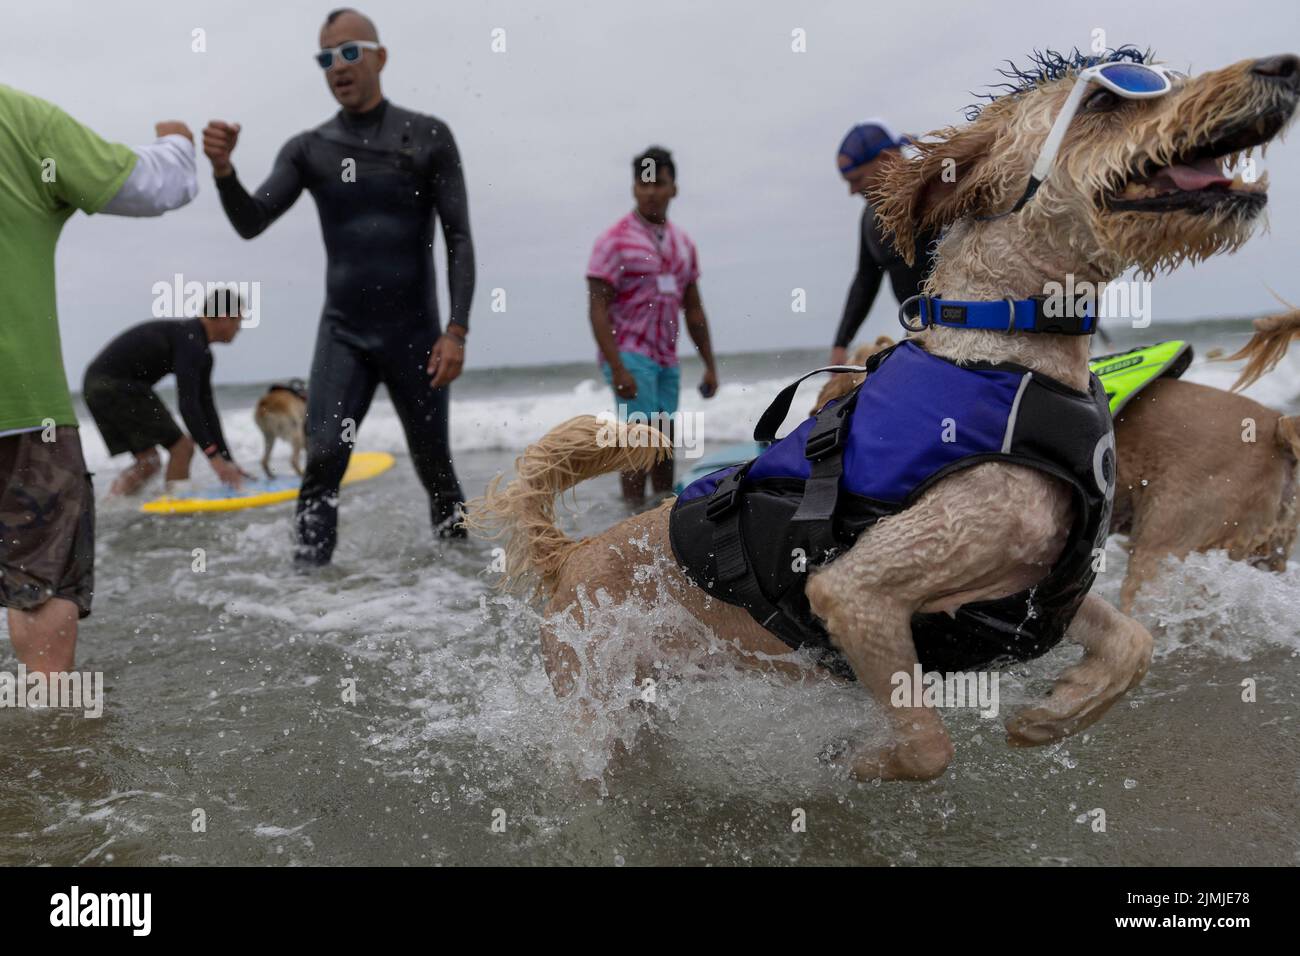 Derby rects as he competes at the World Dog Surfing Championships in Pacifica, California, U.S., August 6, 2022. REUTERS/Carlos Barria Stock Photo